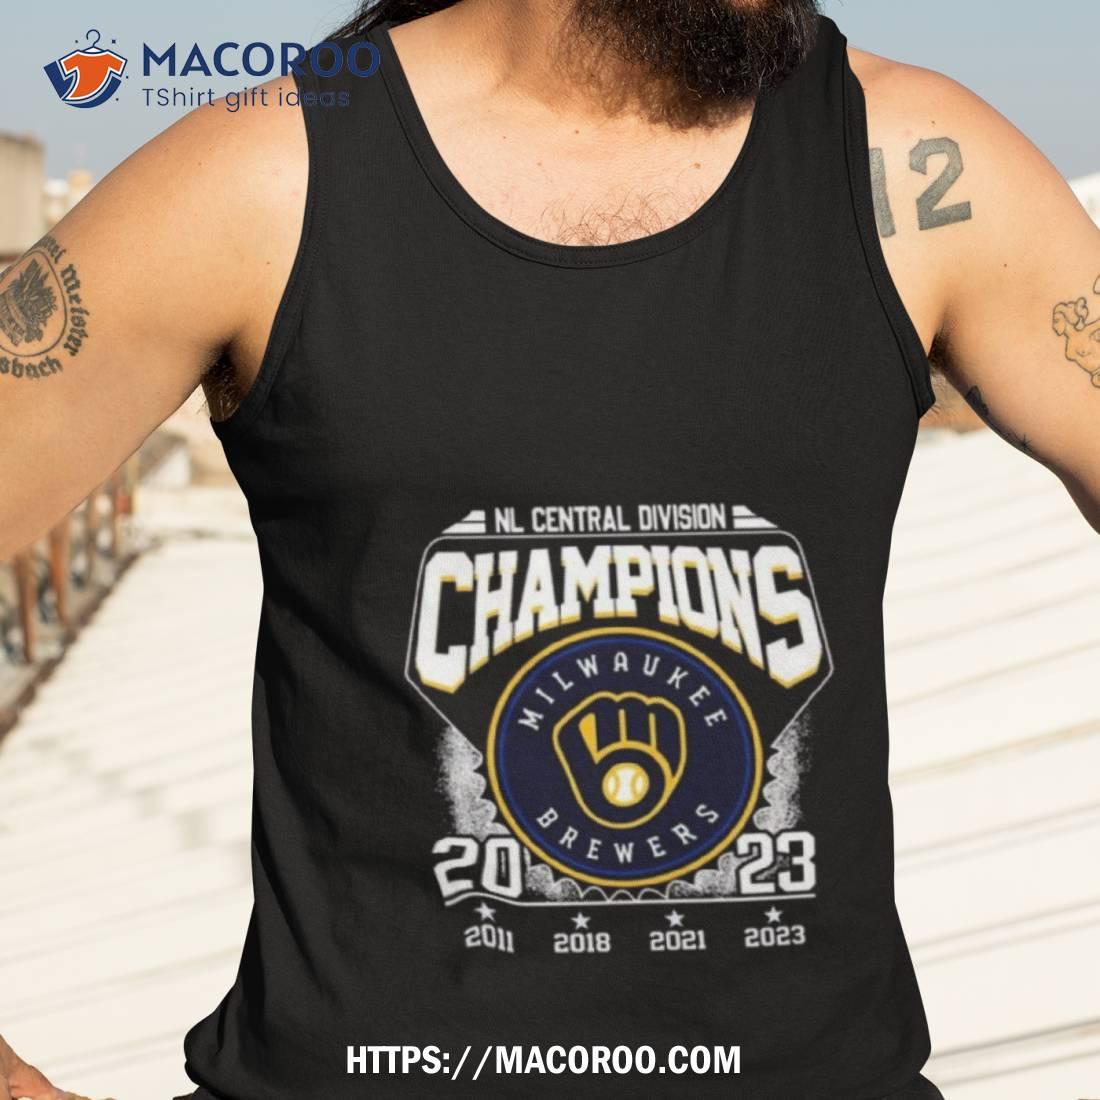 Nl Central Division Champions Milwaukee Brewers 2011 2018 2021 2023 T Shirt